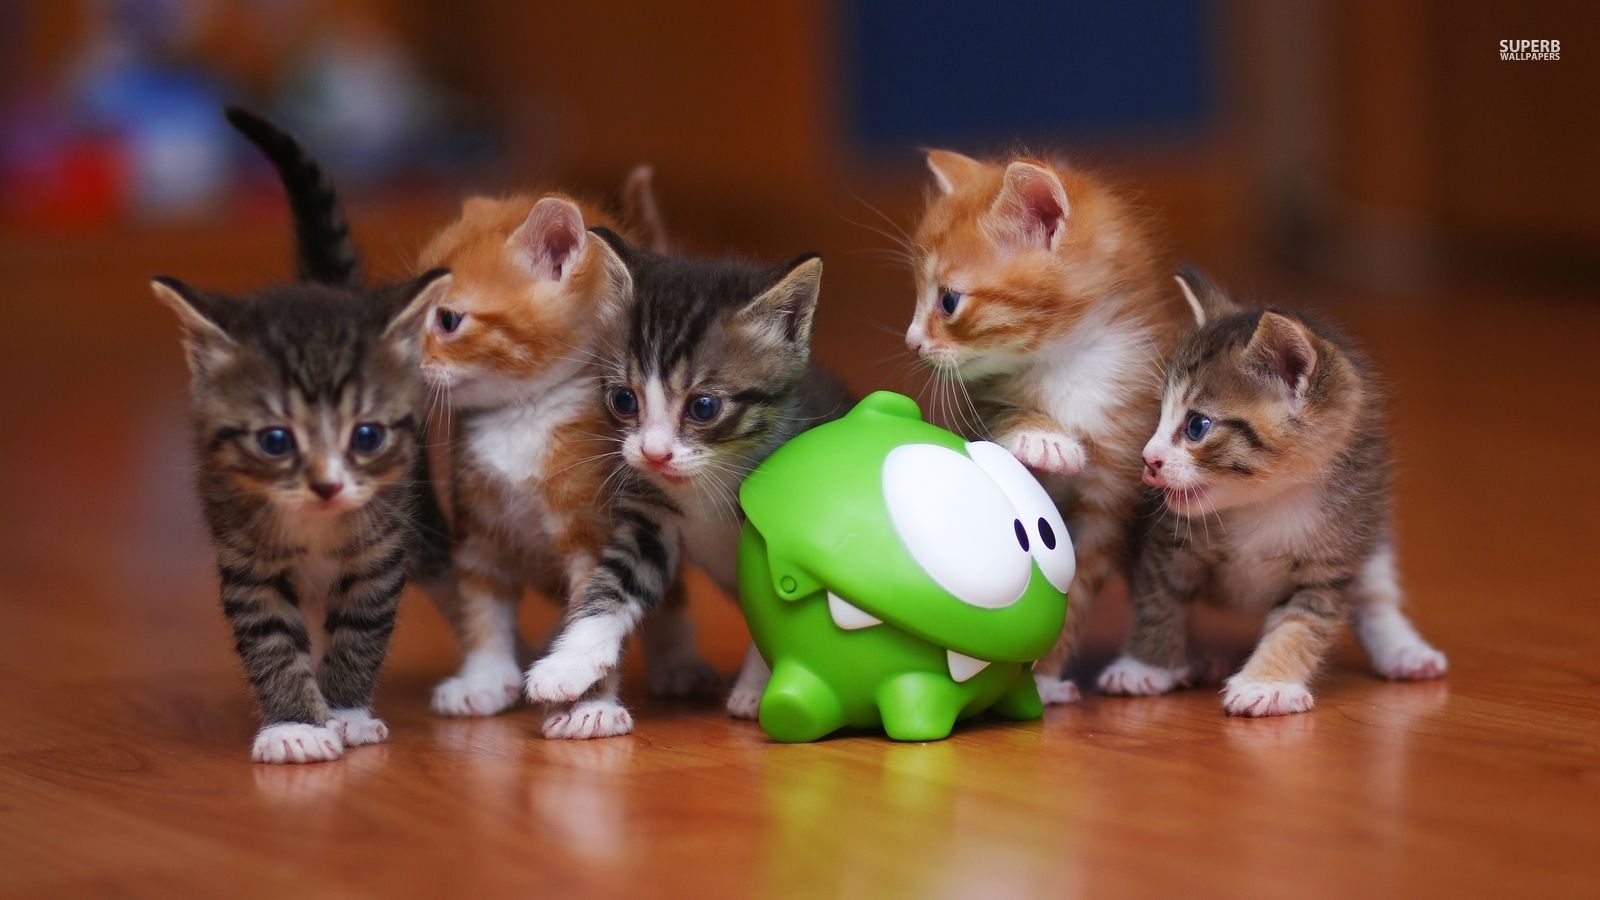 Om Nom and. Kittens! The Rope Wallpaper